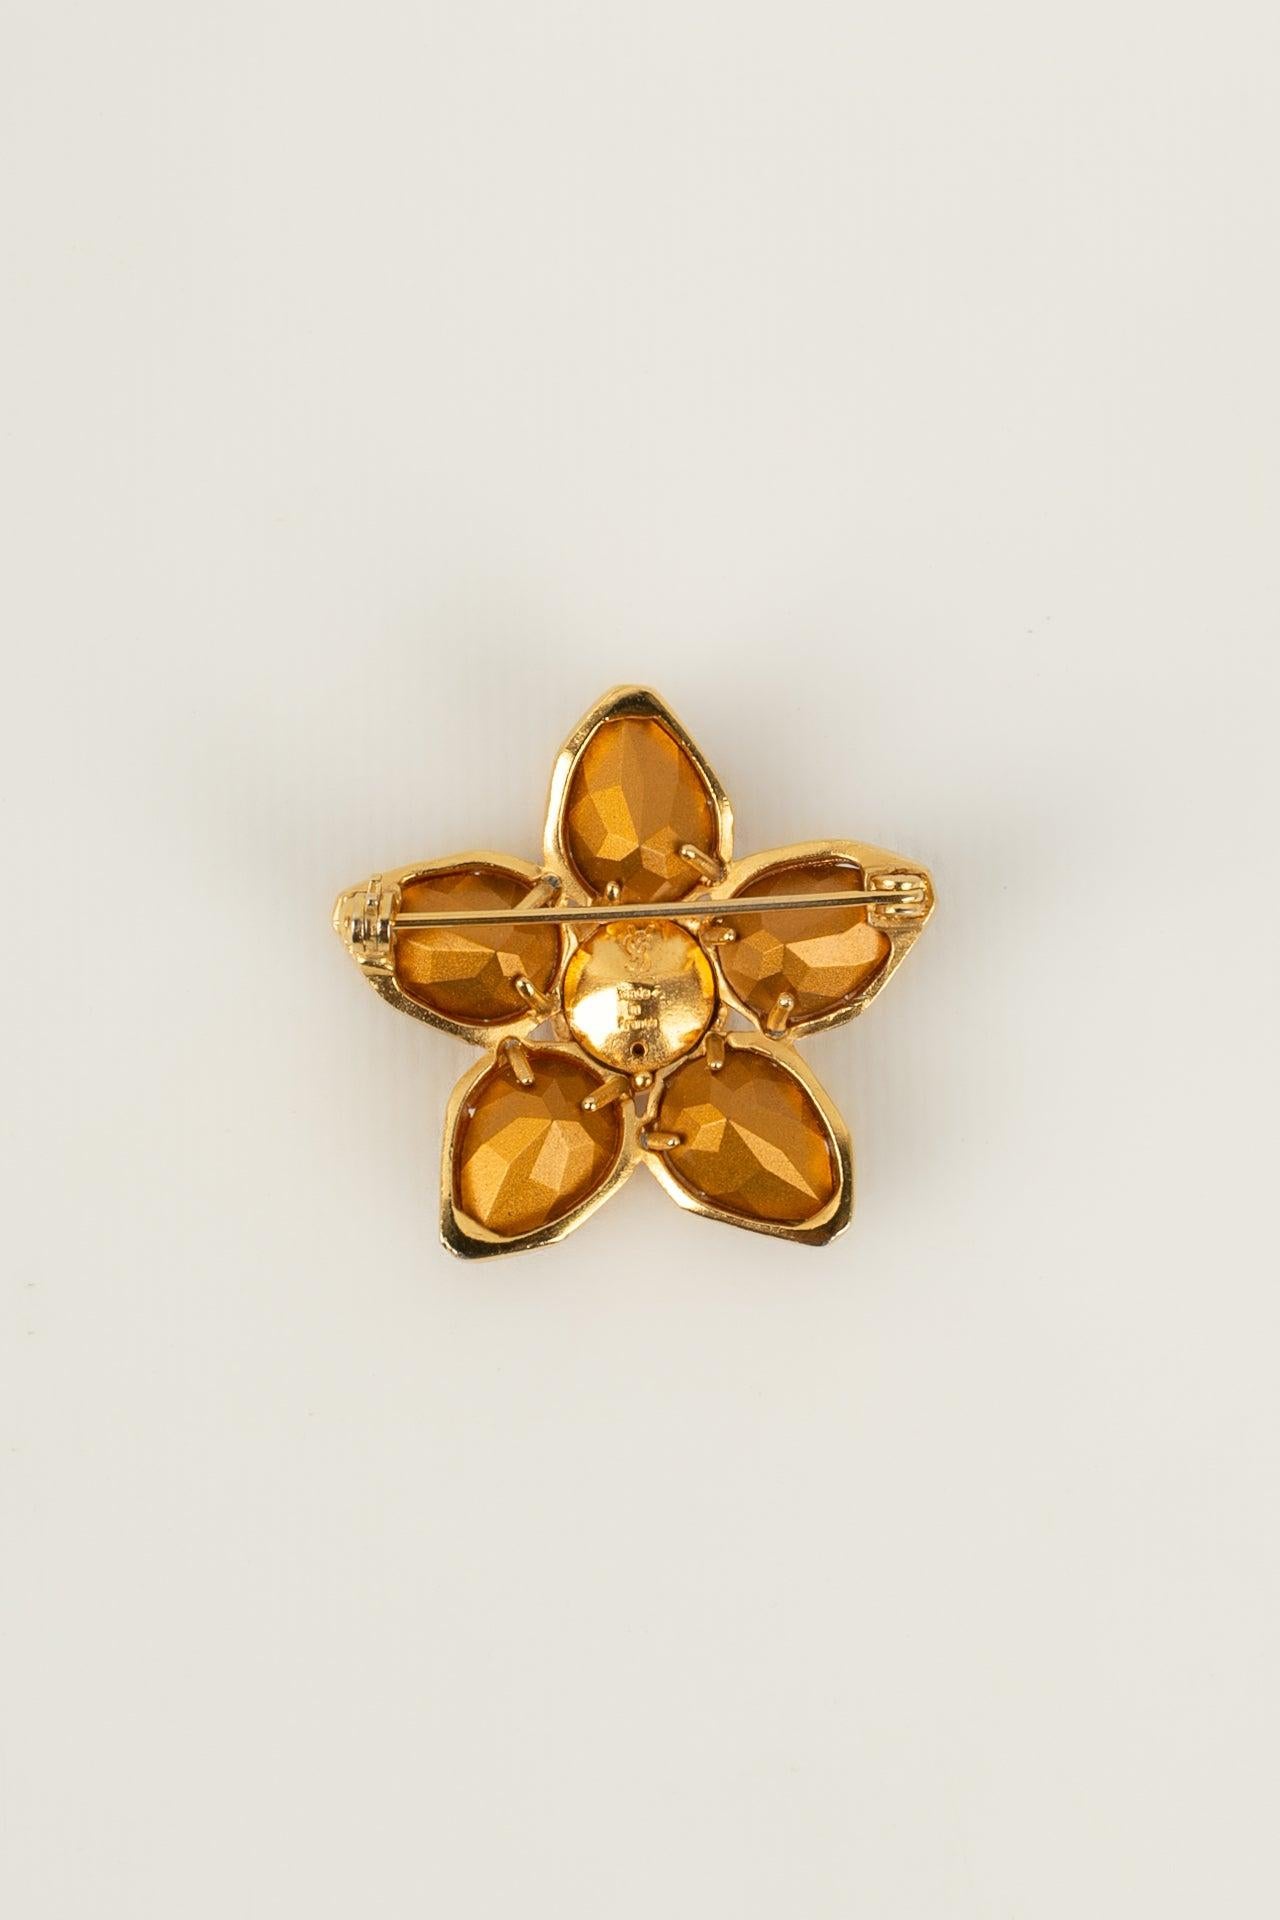 Yves Saint Laurent - (Made in France) Flower brooch in gold-plated metal ornamented with rhinestones.

Additional information:
Condition: Very good condition
Dimensions: Height: 4 cm

Seller Reference: BR98
